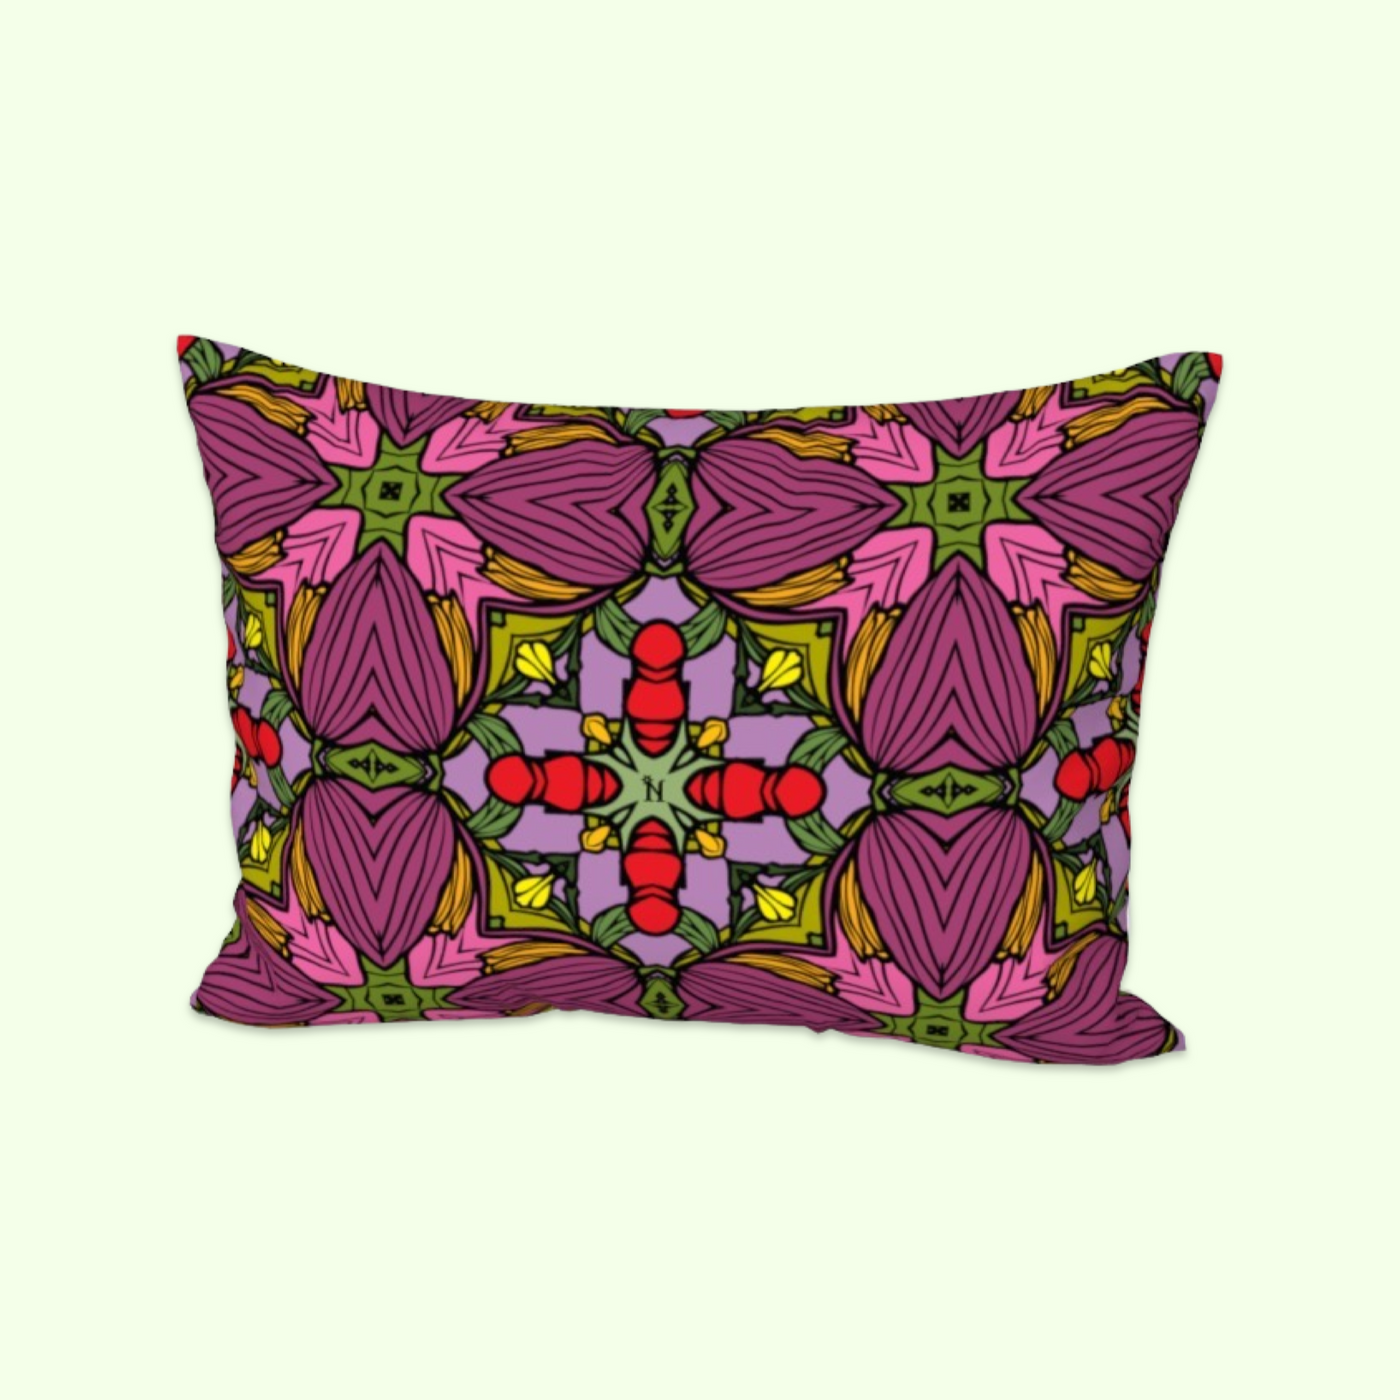 Retro pink floral Bed Pillow